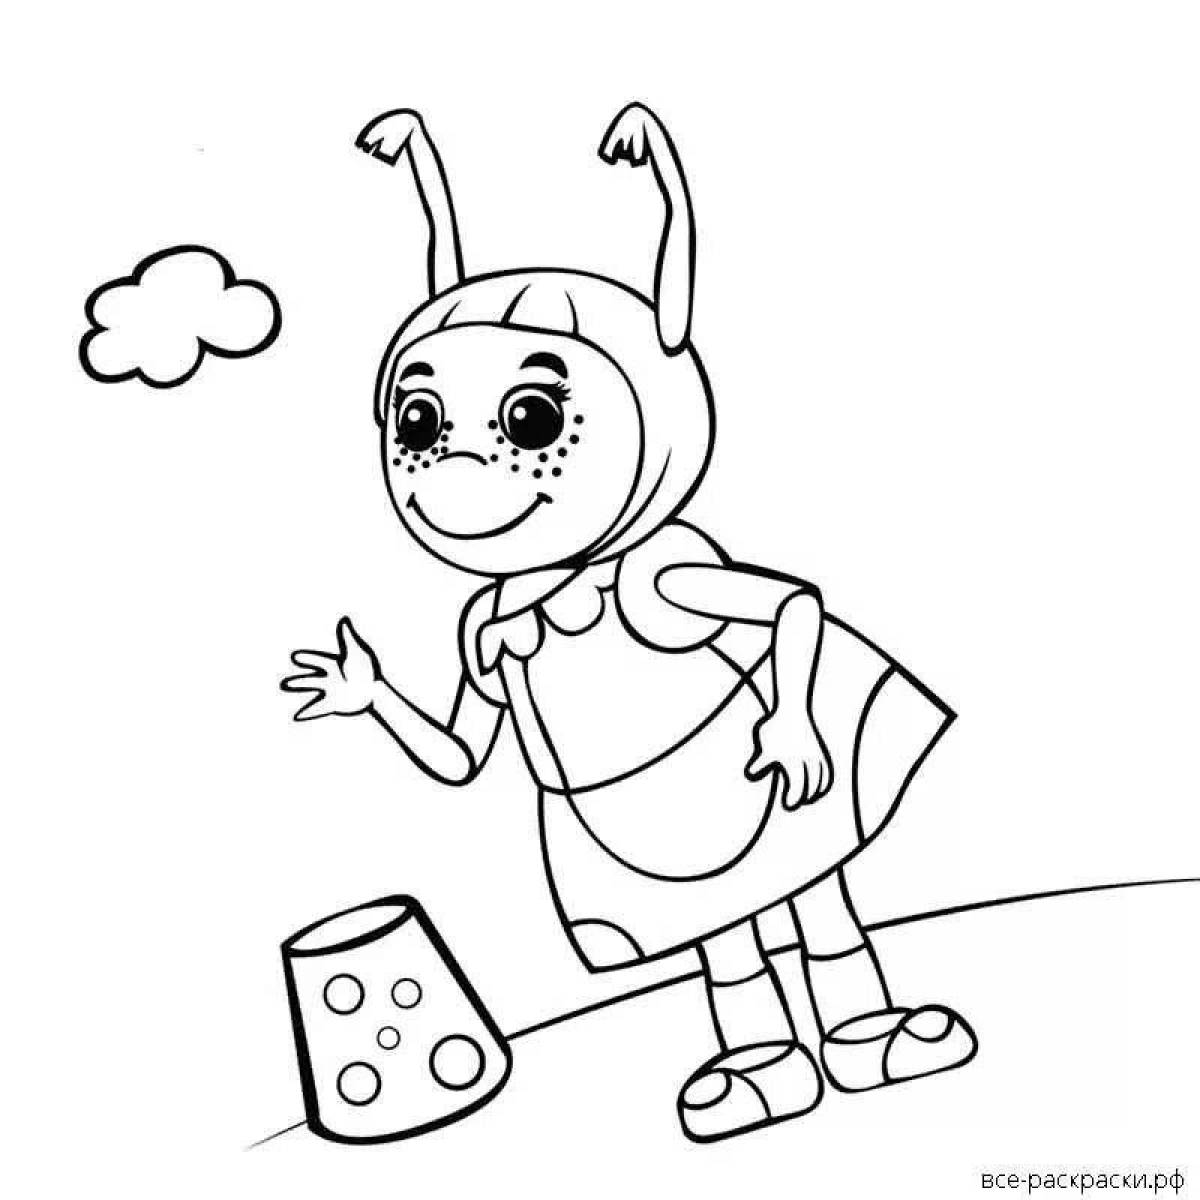 Cute little bees coloring pages